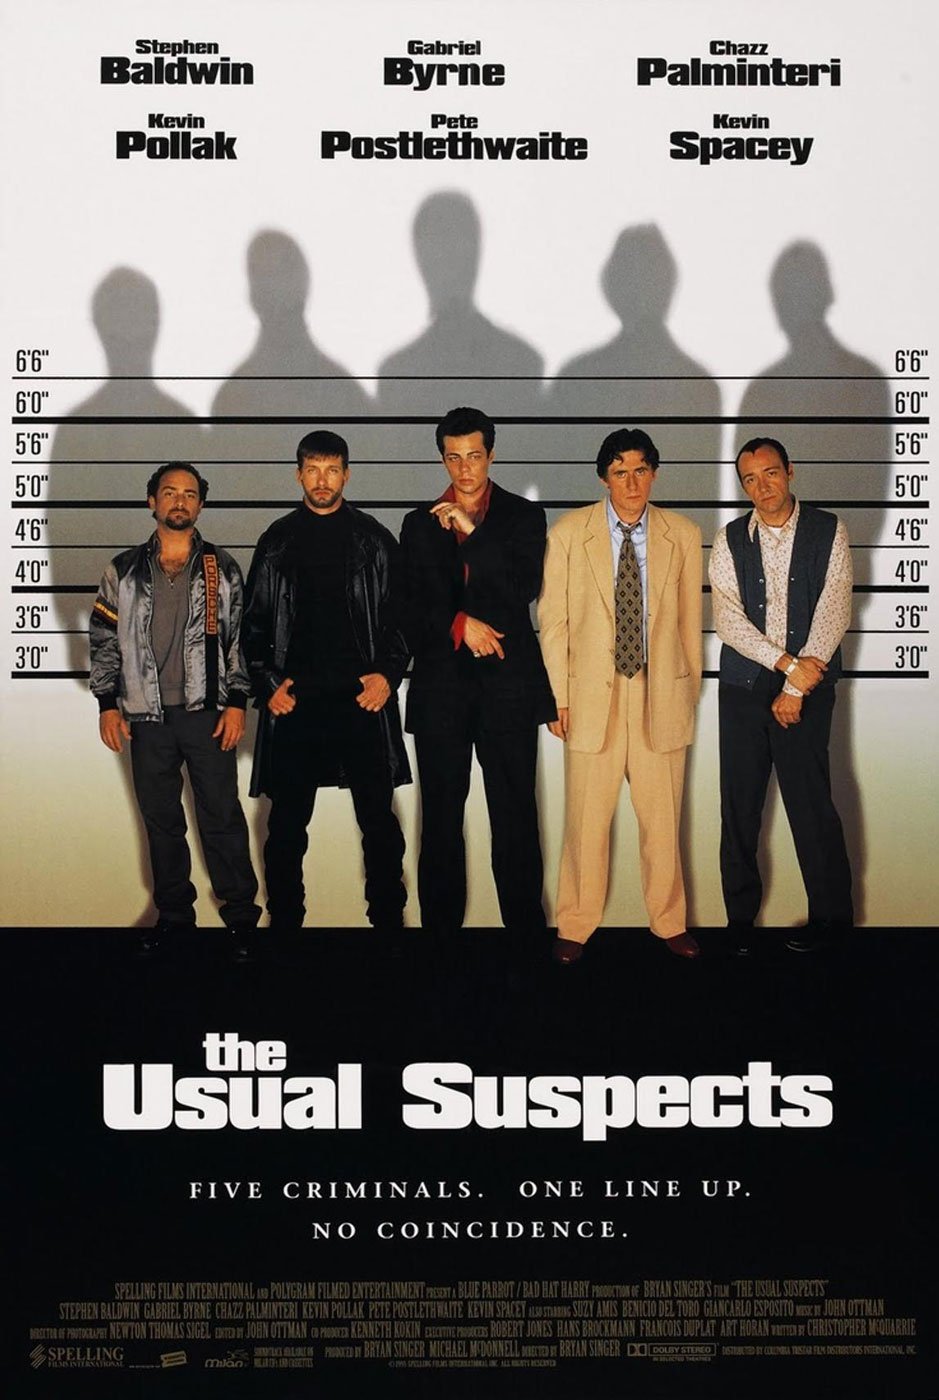 The Usual Suspects - Bryan Singer (1995)